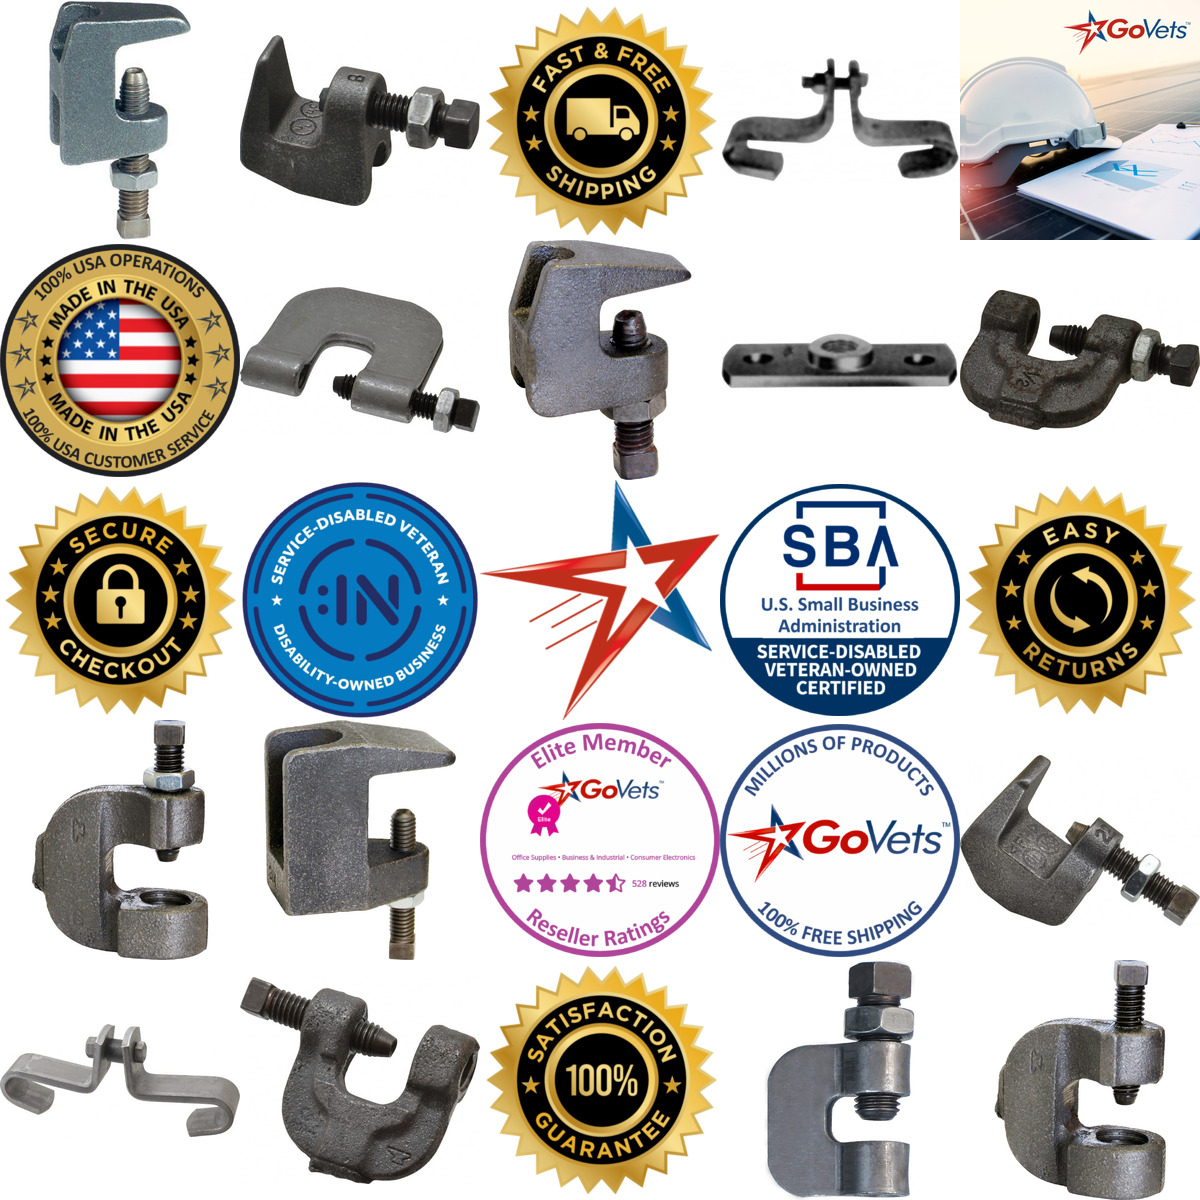 A selection of Anvil products on GoVets